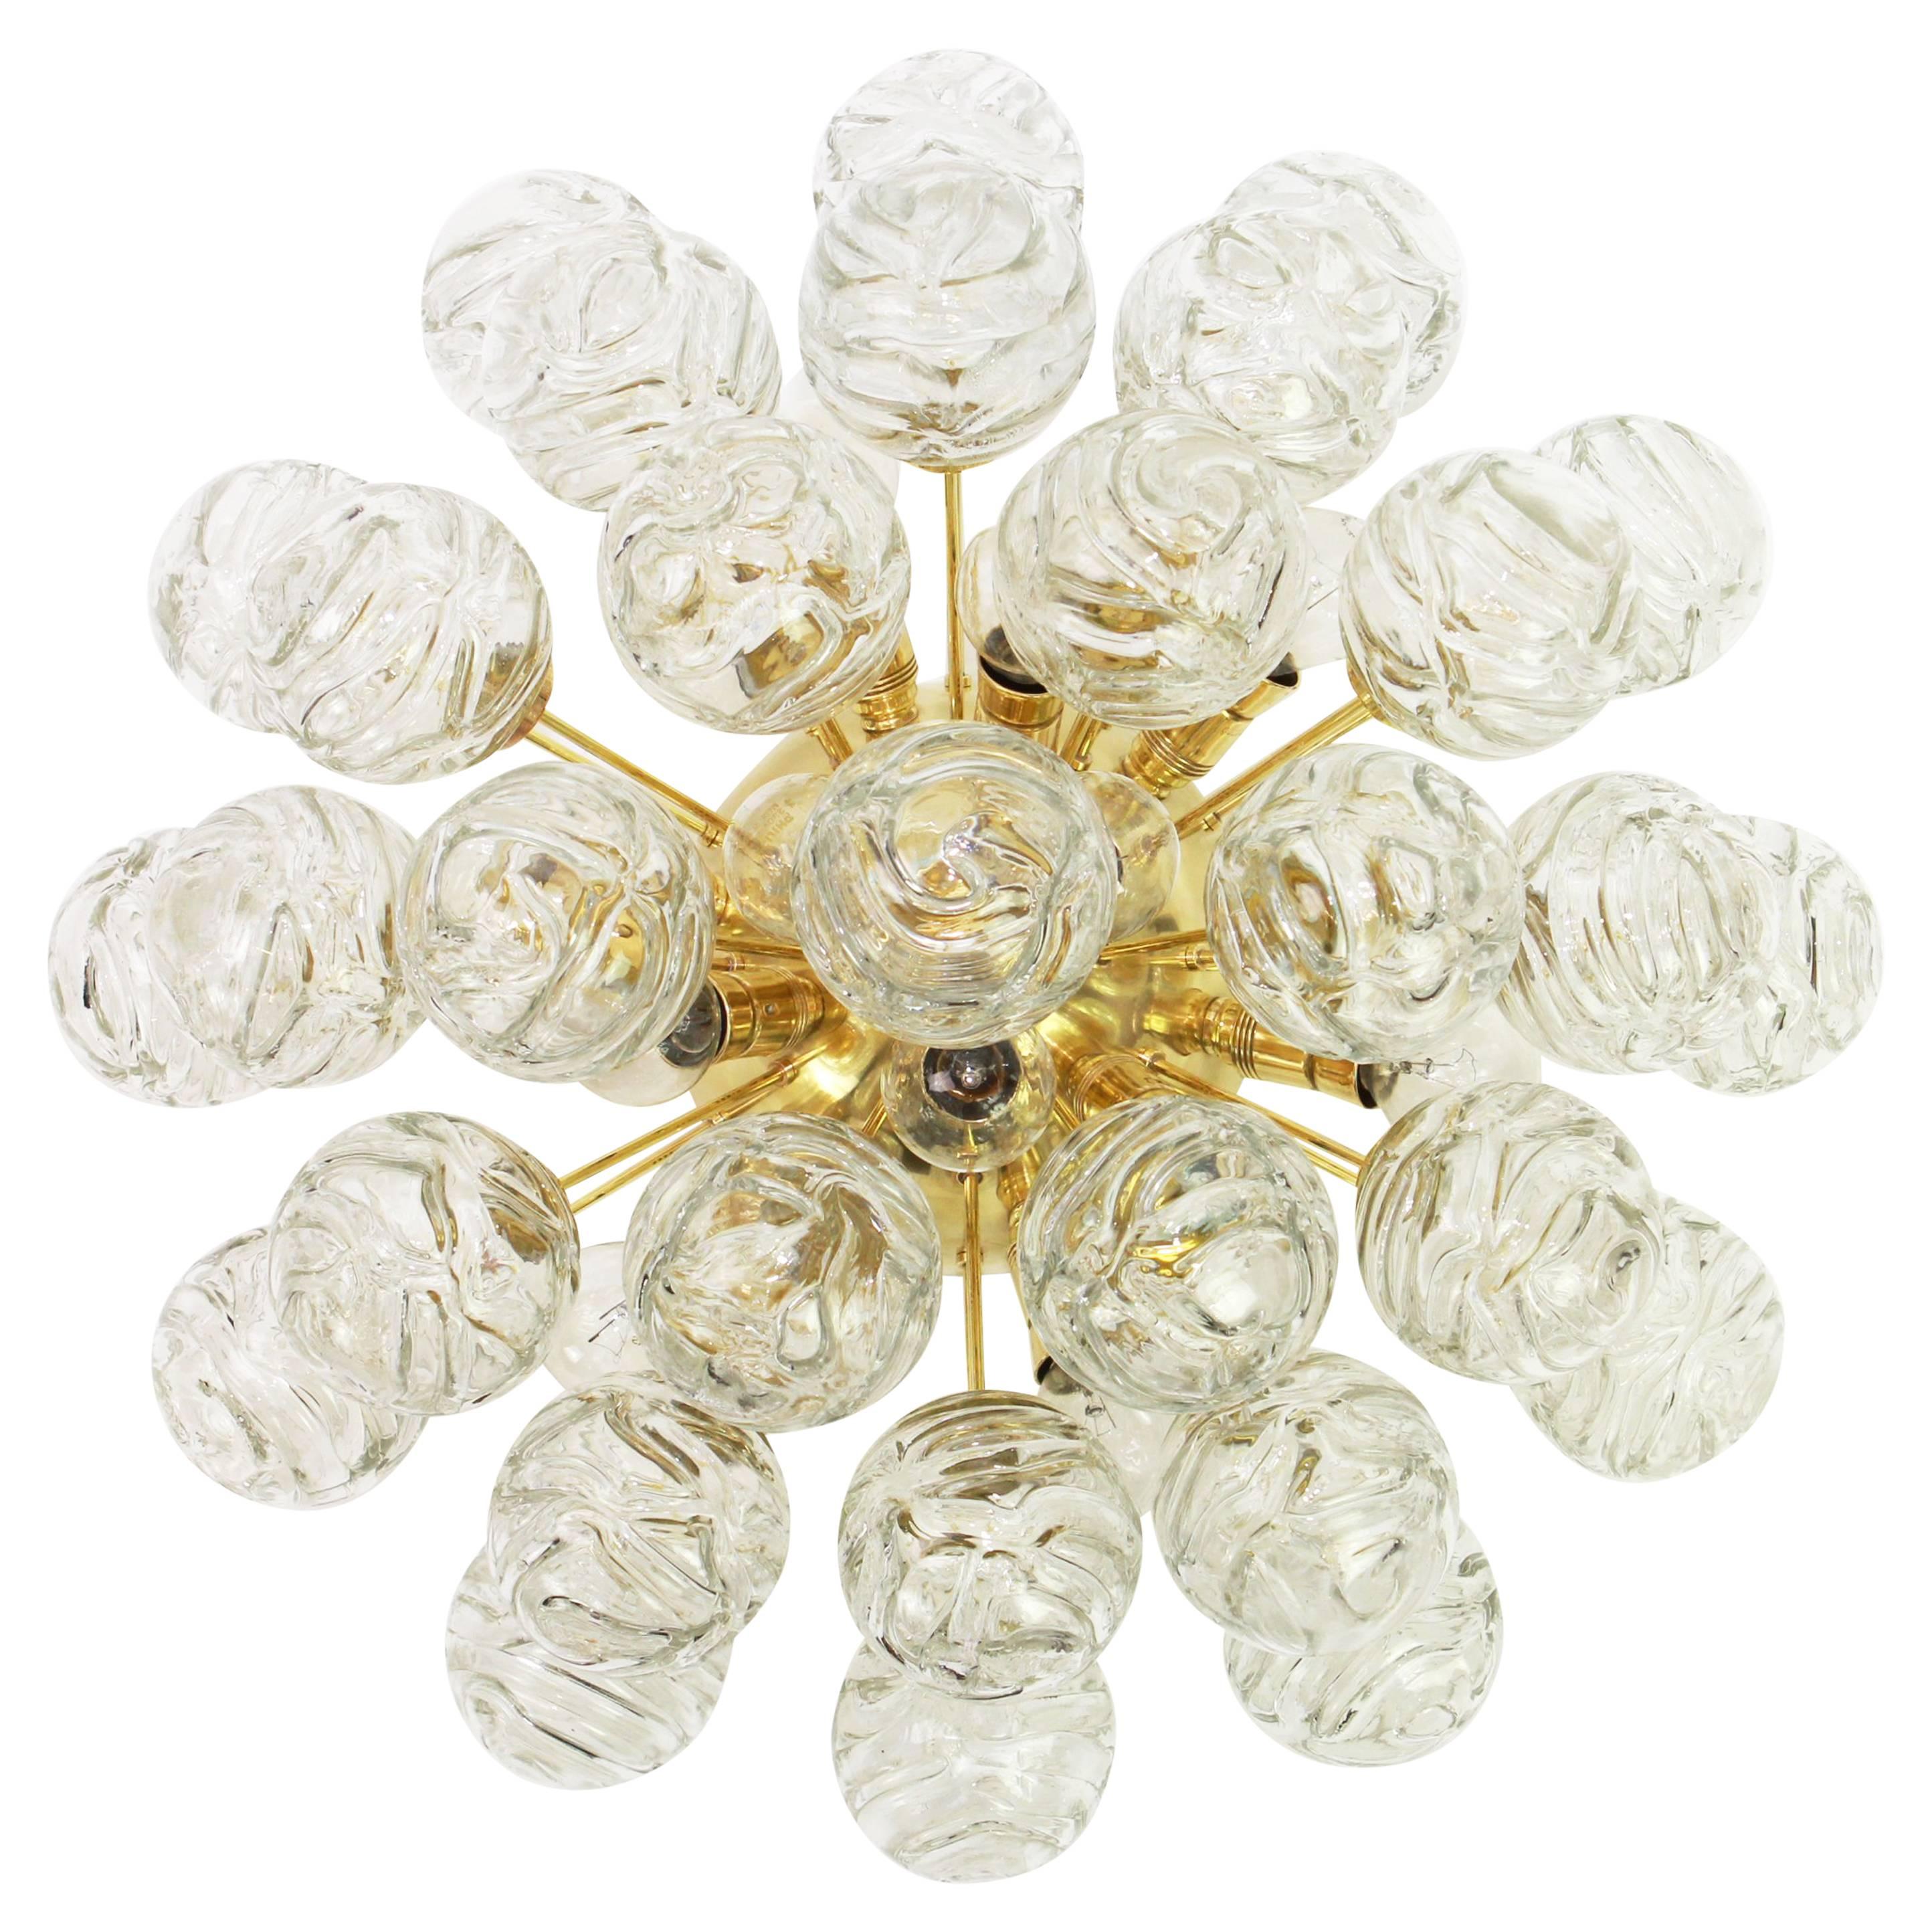 Spectacular Sputnik flush mount with glass snowballs designed by Doria, Germany, 1970s
All glass balls are in good condition.
It needs 12 small size bulbs (E-14 bulbs) up to 40 watts each and is compatible with the US /UK/ .. Standards.

2 items